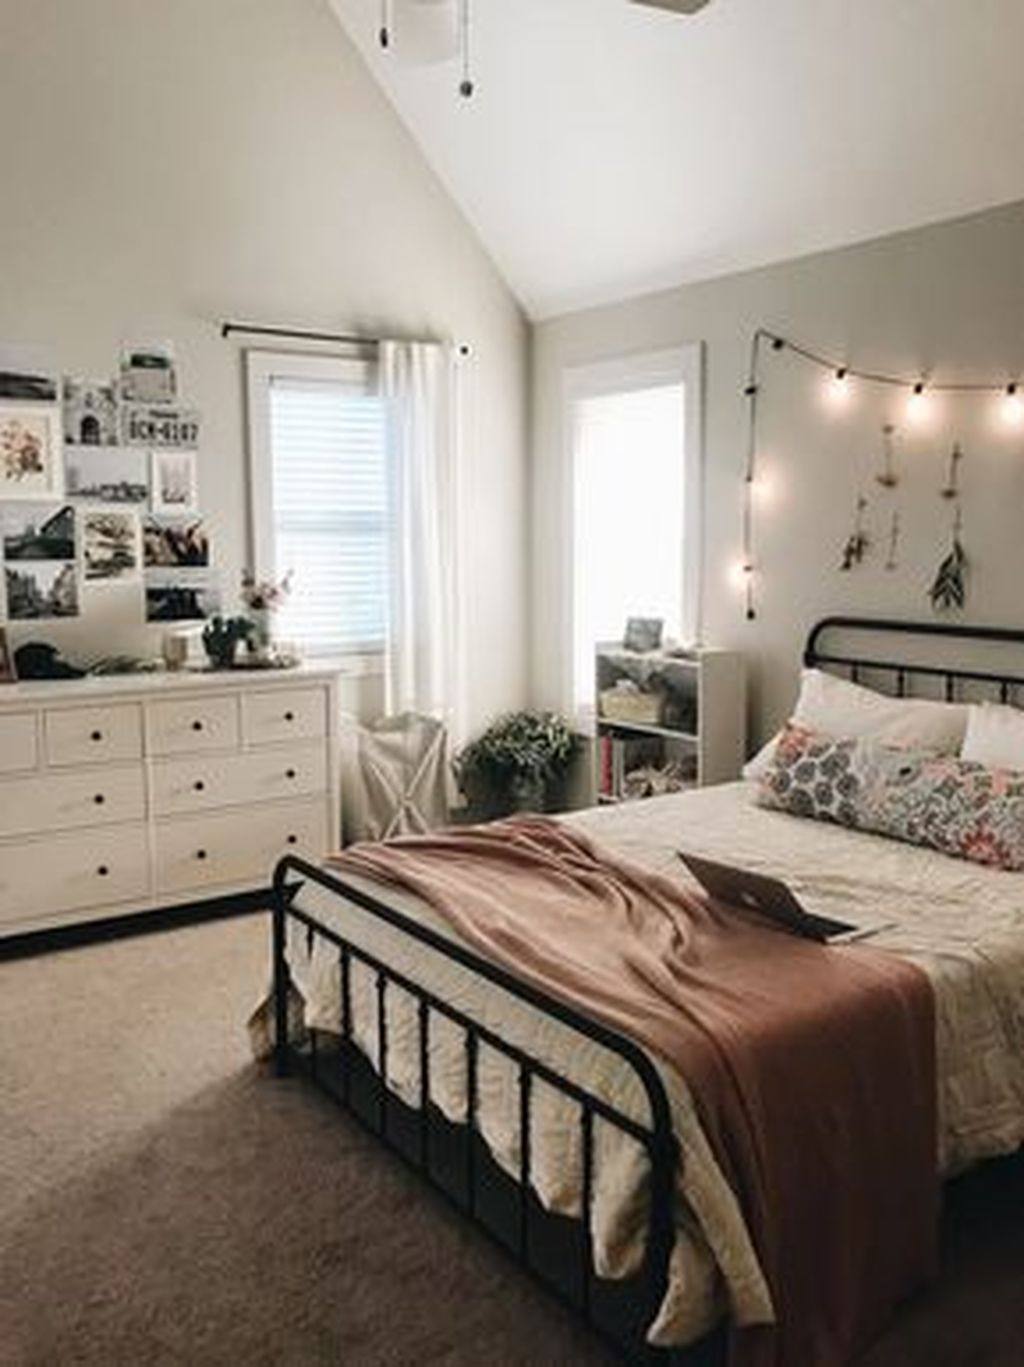 Stunning Teens Bedrooms Design Ideas For Small Spaces To Try 11